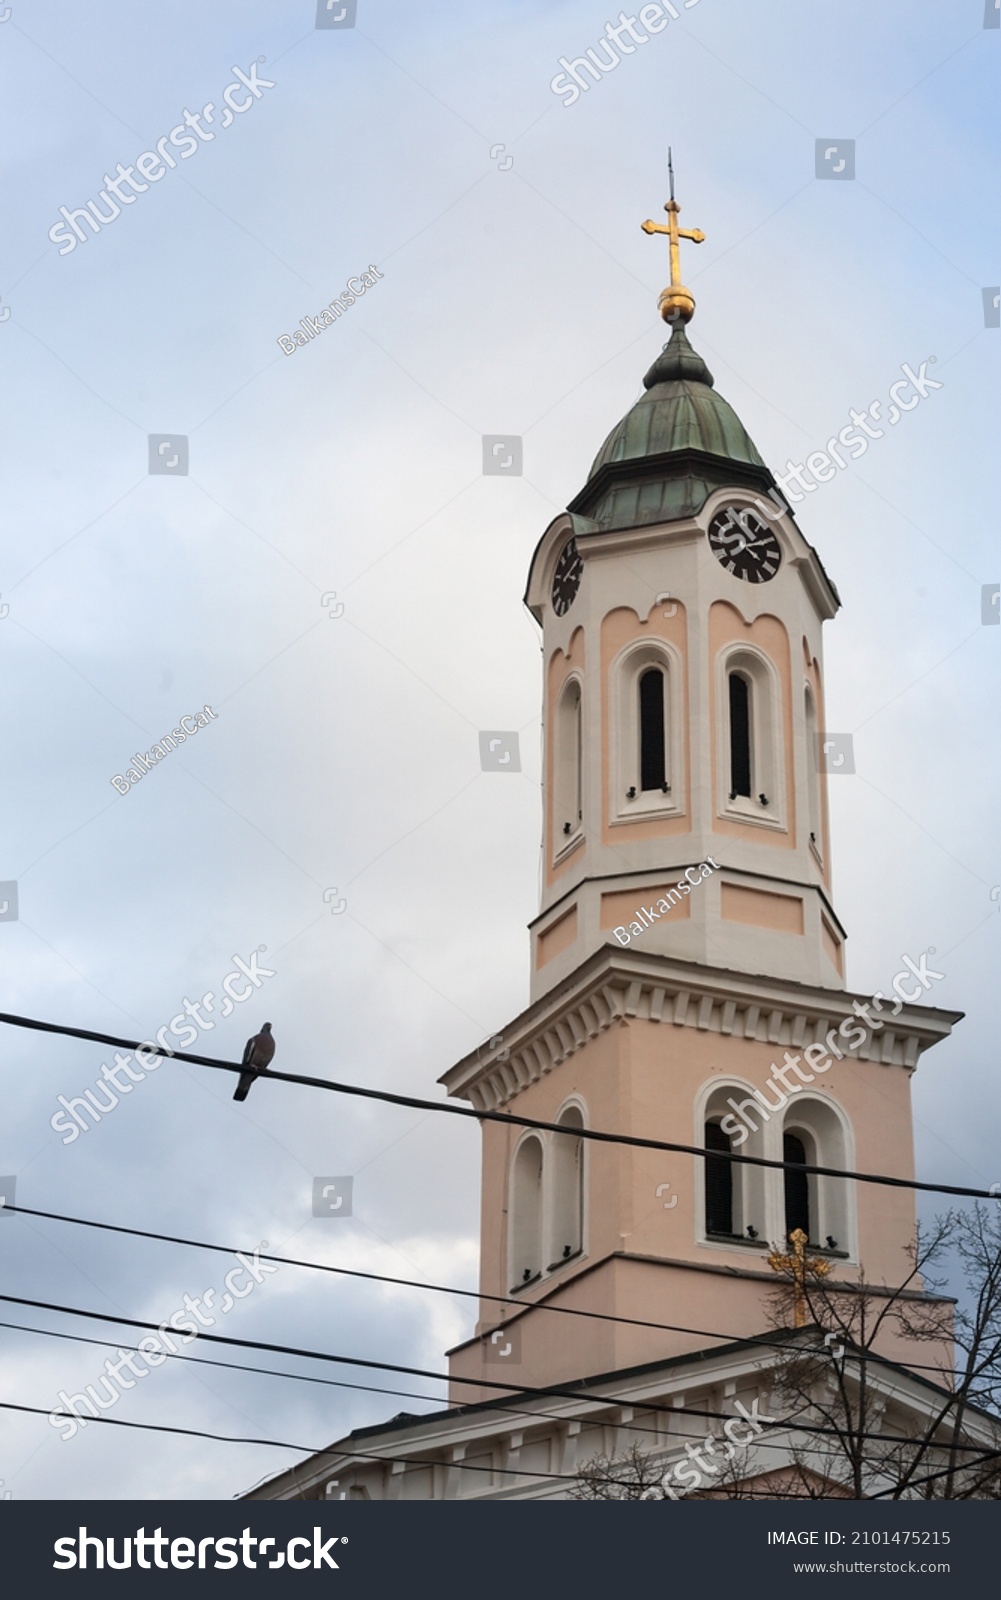 Close up on Church clocktower steeple of the serbian orthodox church of Crkva svetog duha, church of the holy spirit, in Obrenovac, Serbia with its iconic clock indicating the time.  #2101475215